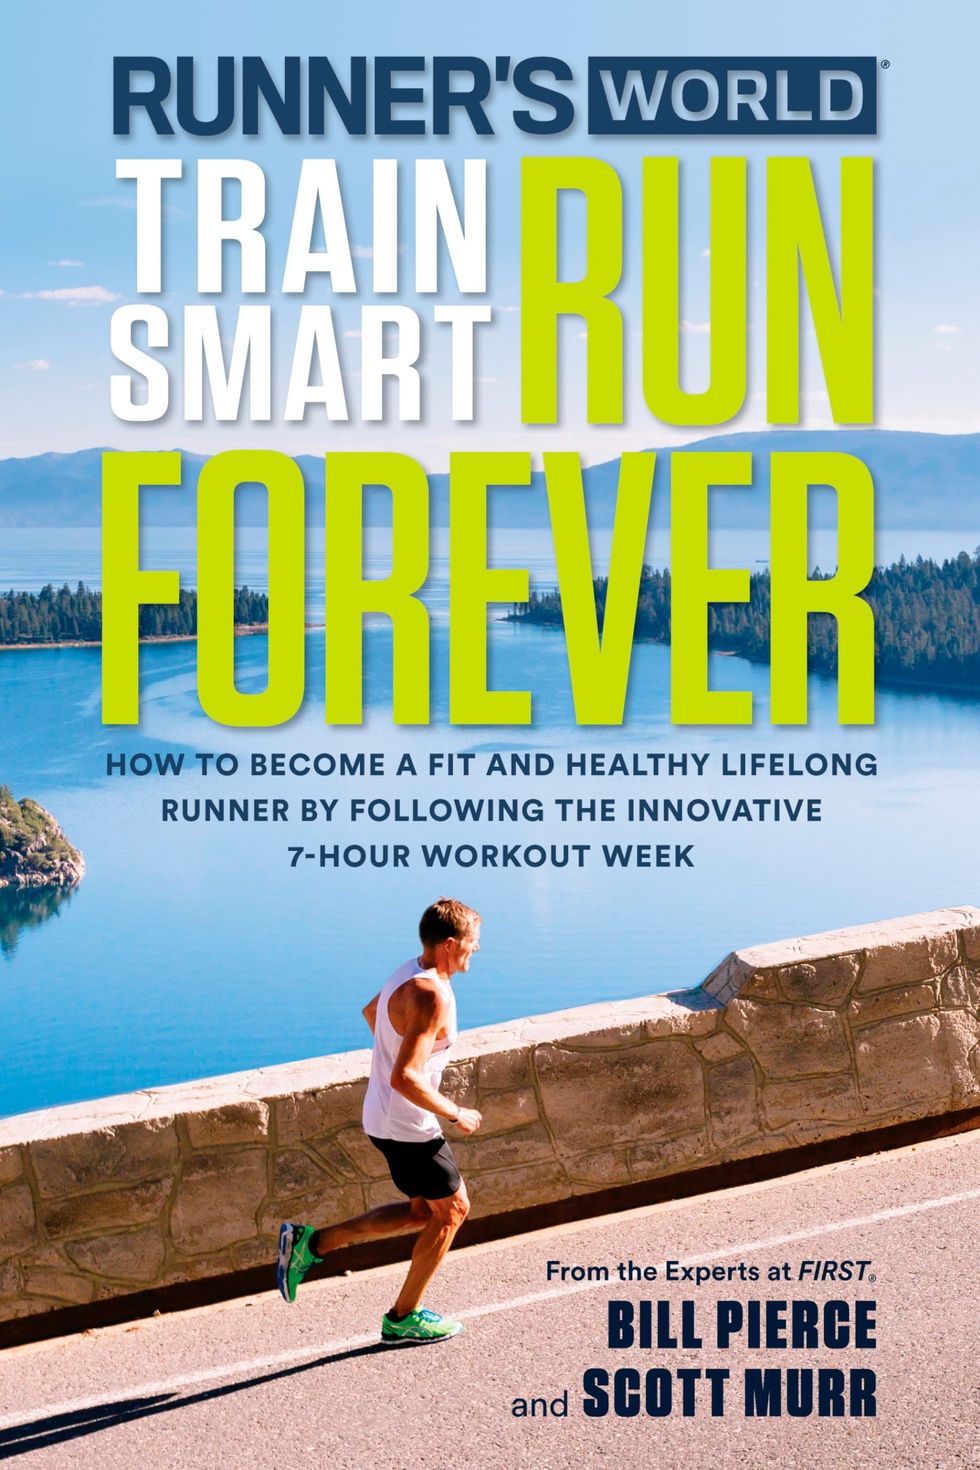 'Runner's World Train Smart, Run Forever: How to Become a Fit and Healthy Lifelong Runner by Following The Innovative 7-Hour Workout Week' by Bill Pierce and Scott Murr